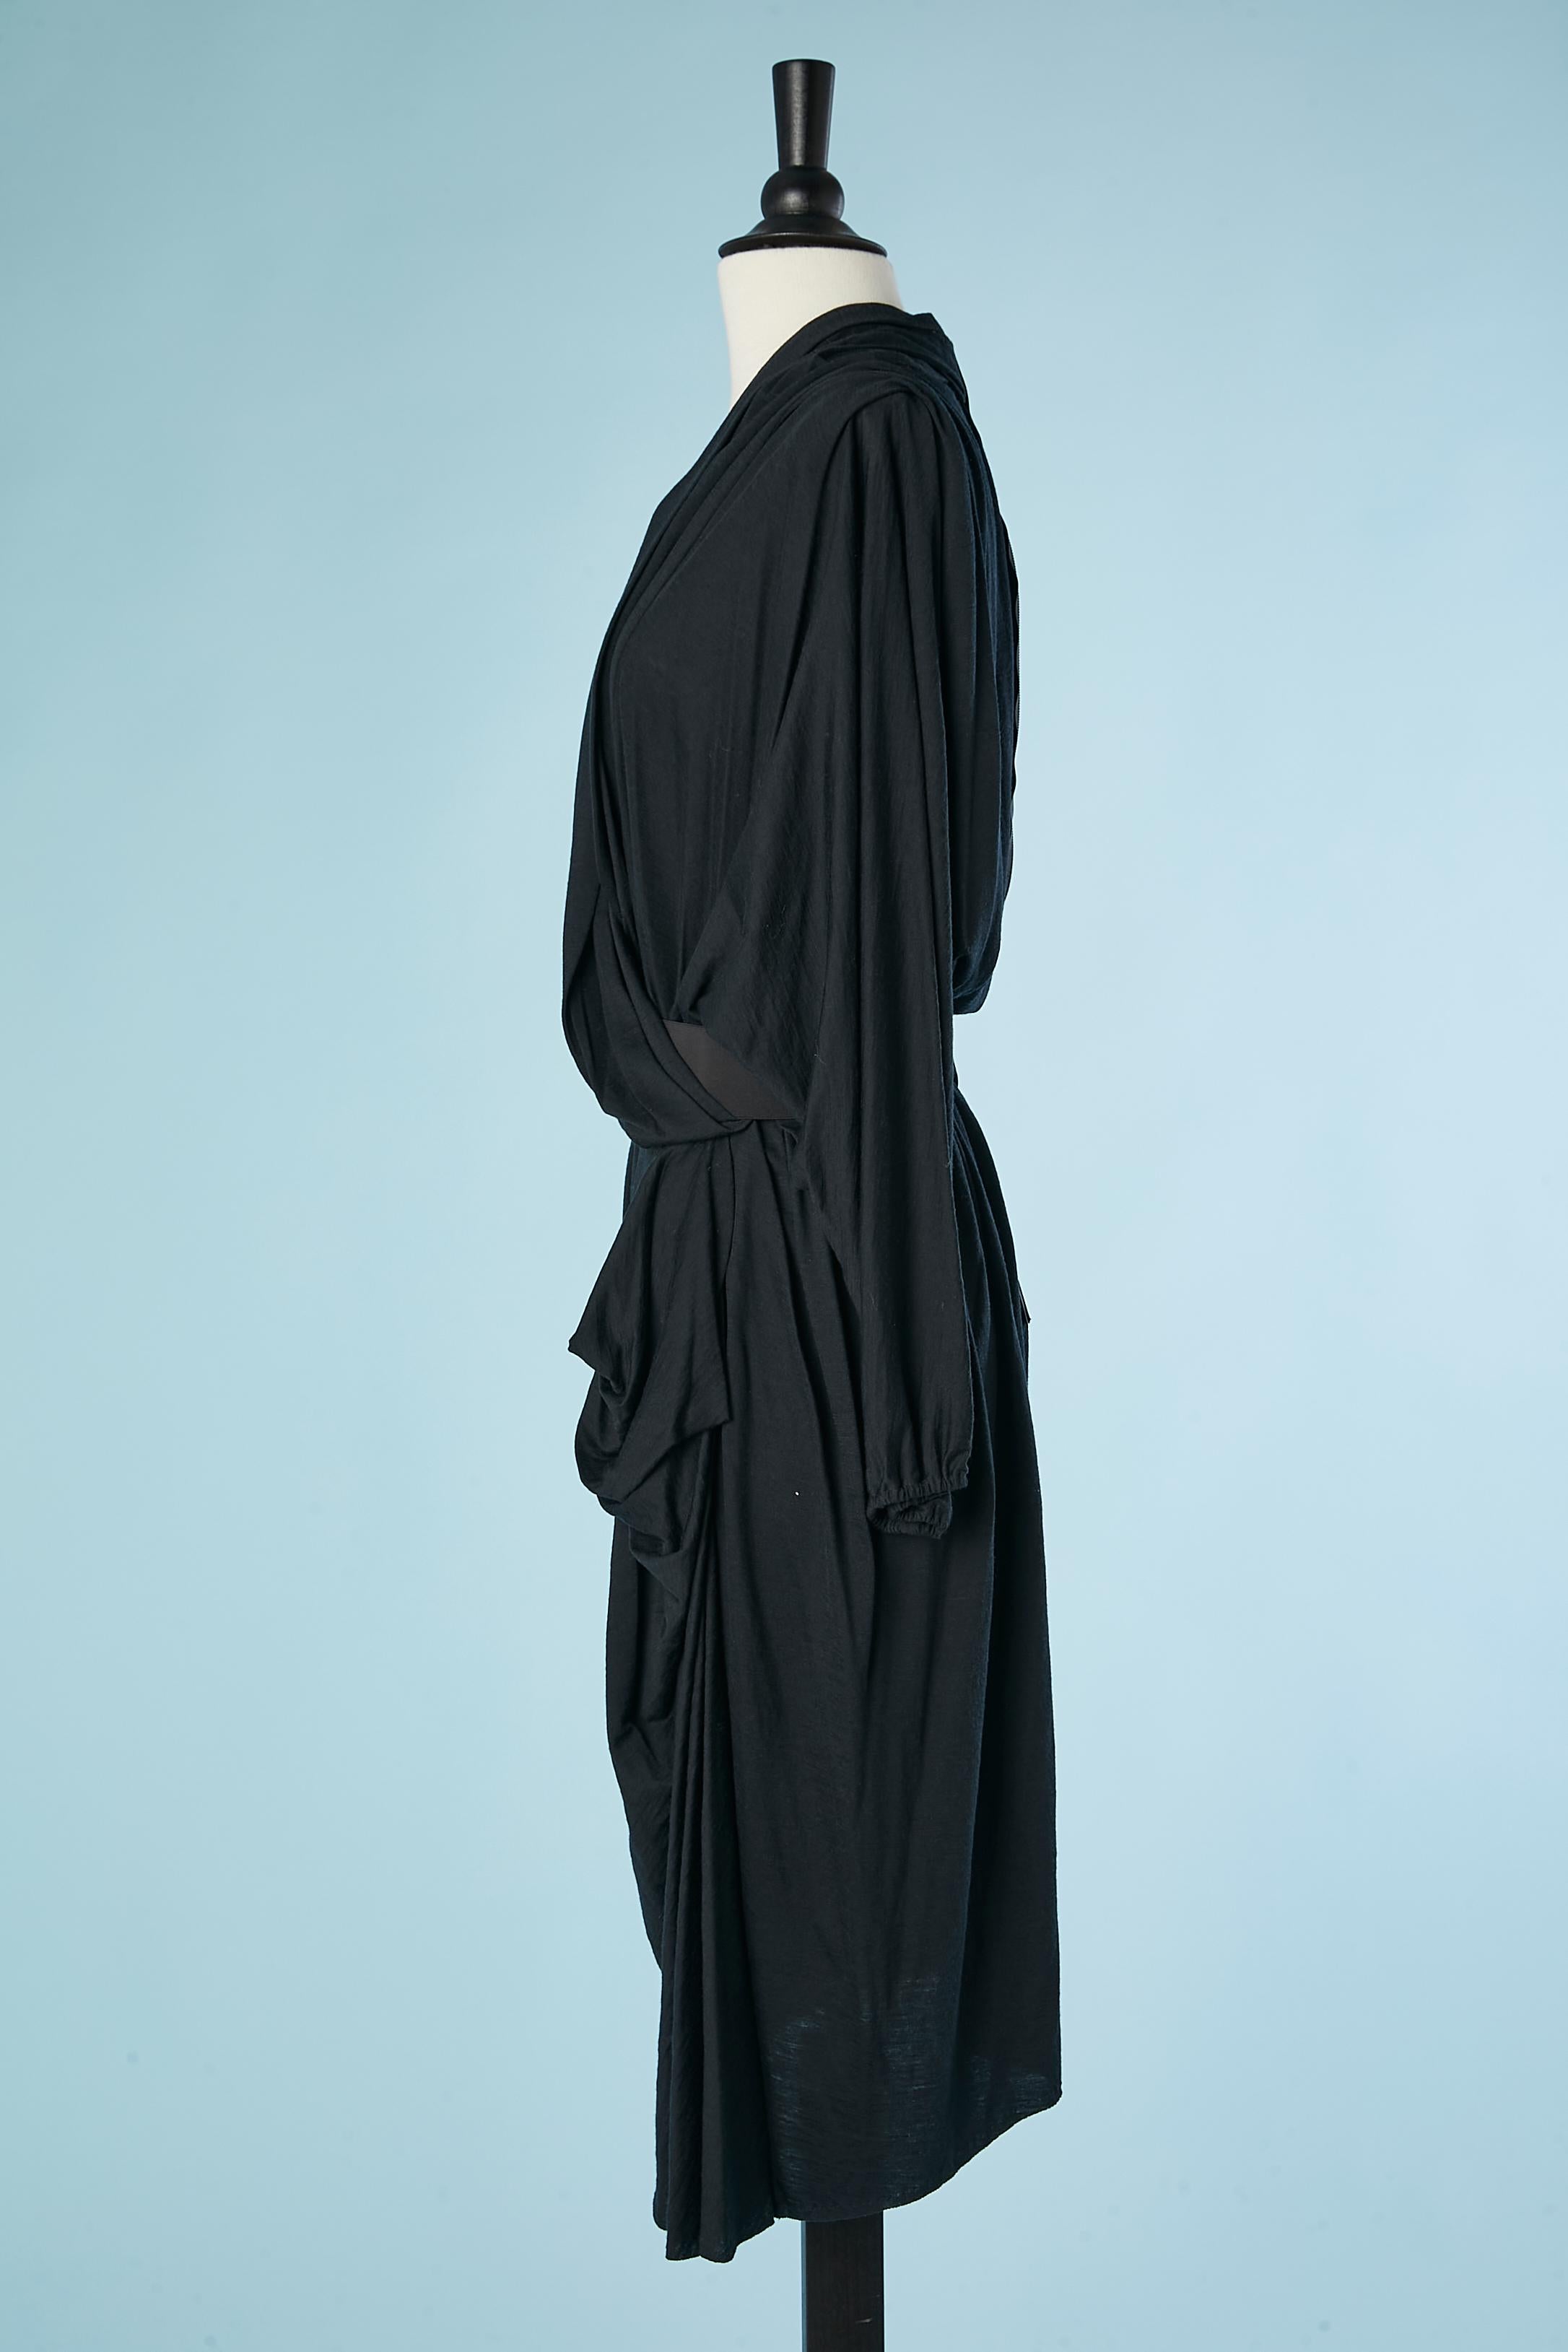 Wool drape jersey dress with elastic waist band Lanvin by A.Elbaz for Corso Como In Excellent Condition For Sale In Saint-Ouen-Sur-Seine, FR